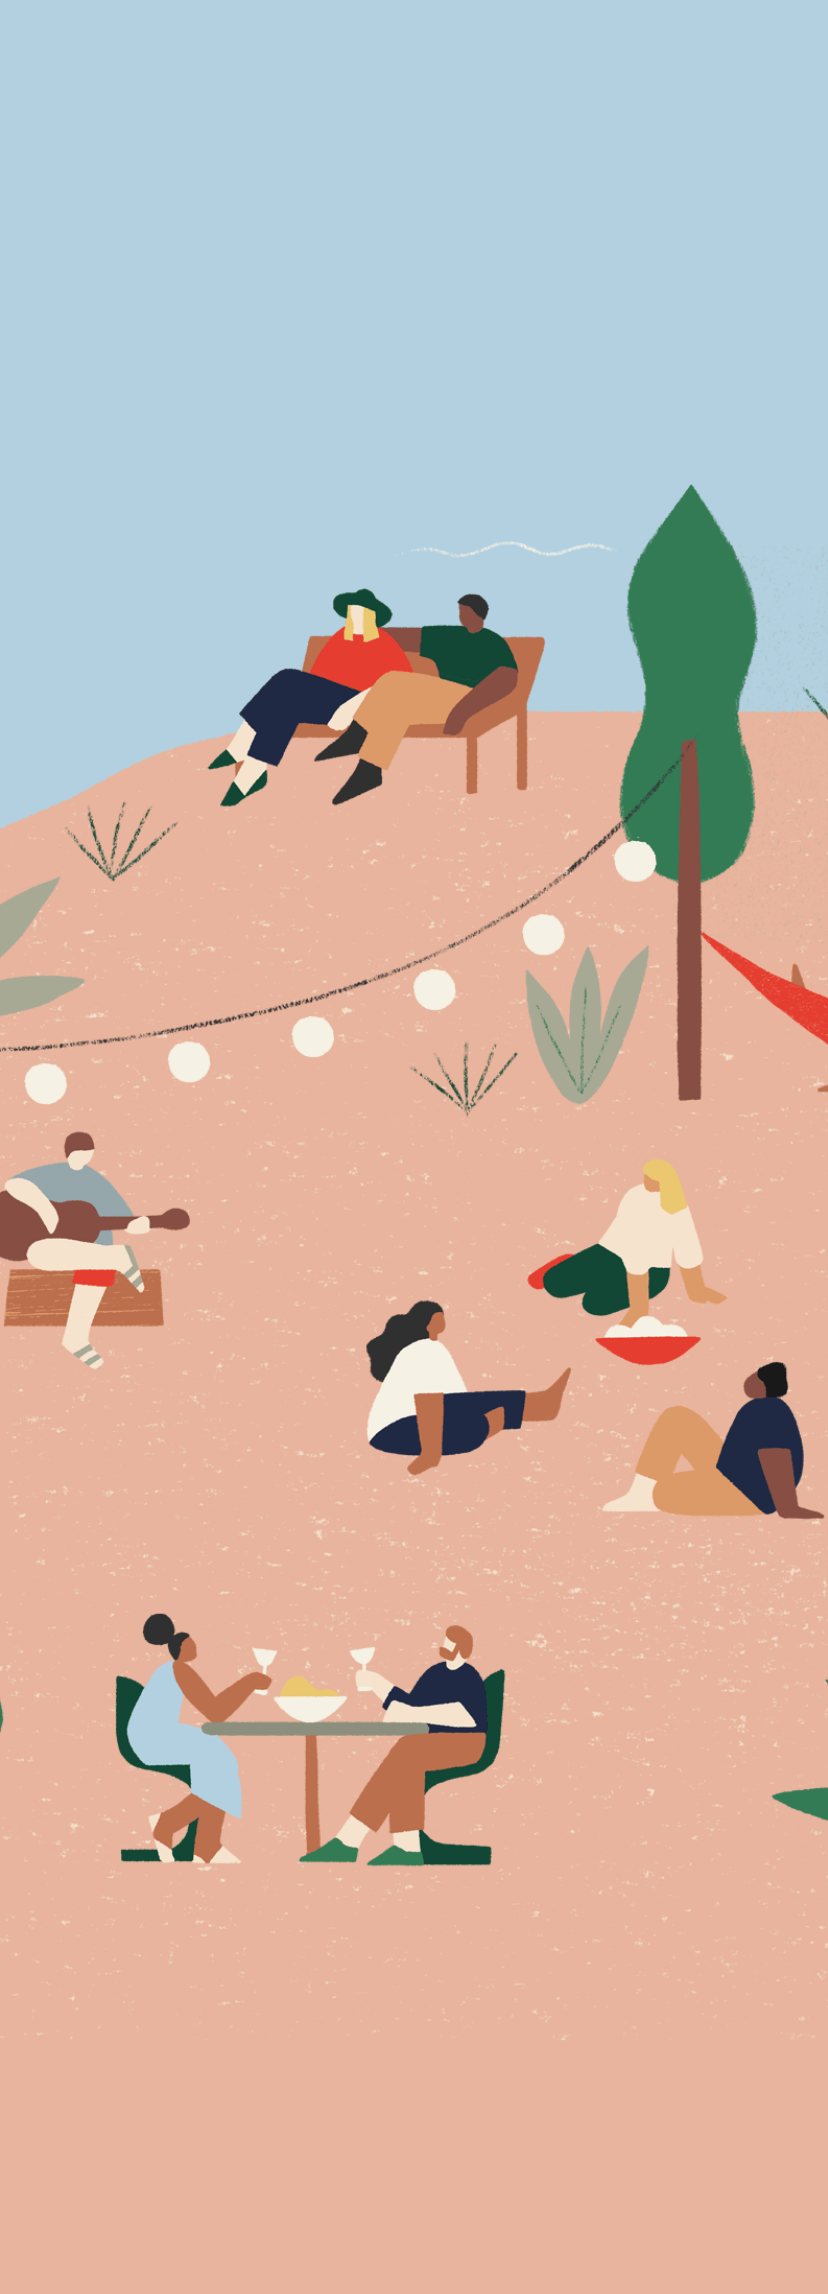 An illustration of people doing various activities in a neighborhood park.